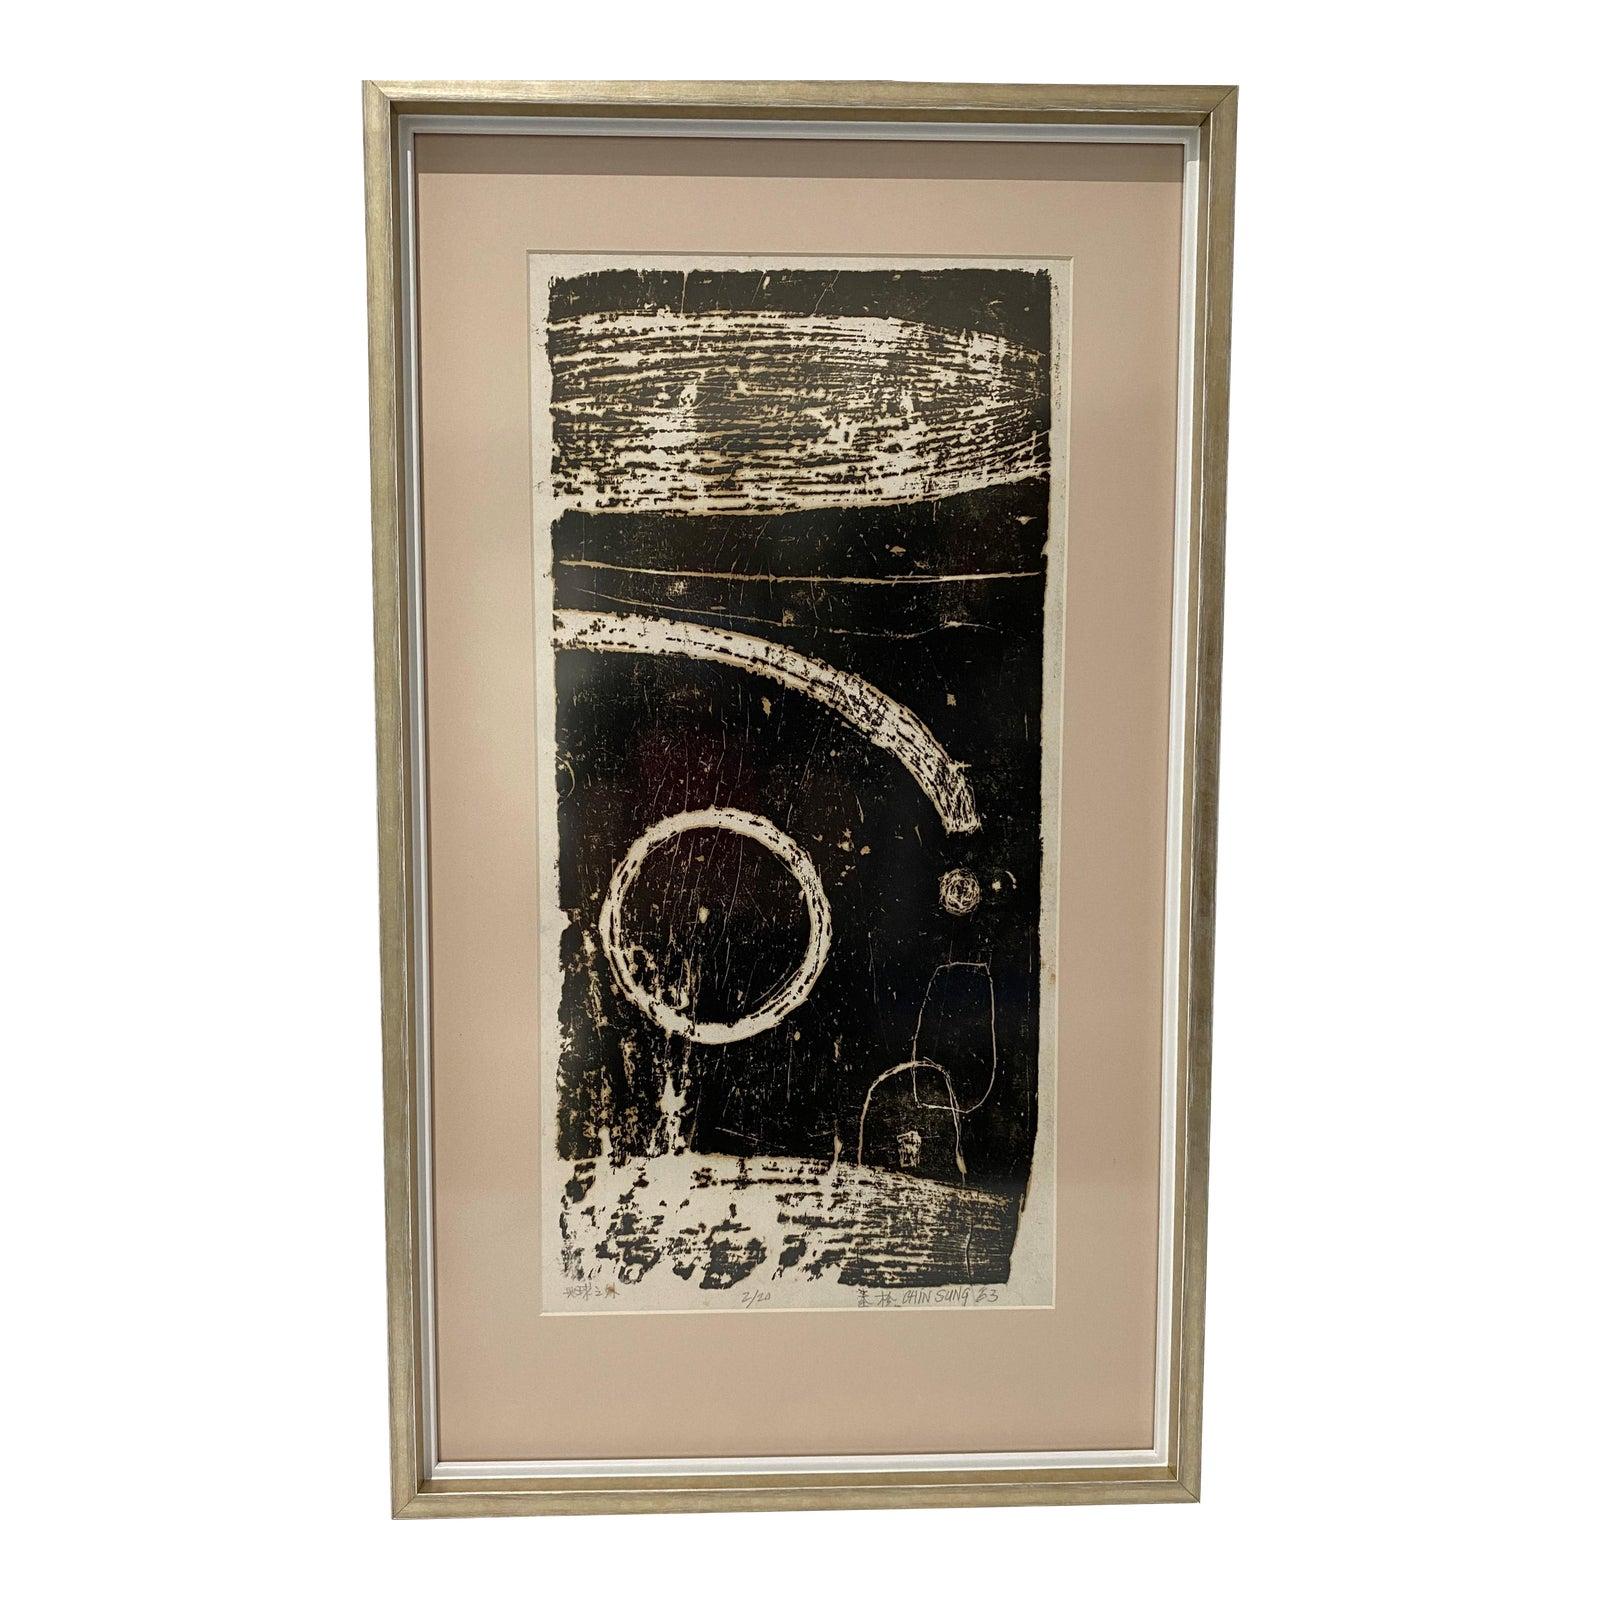 Space Age Wood Block Print "Away From the Earth" 2/20 by Chin Sung 'Xin Song' For Sale